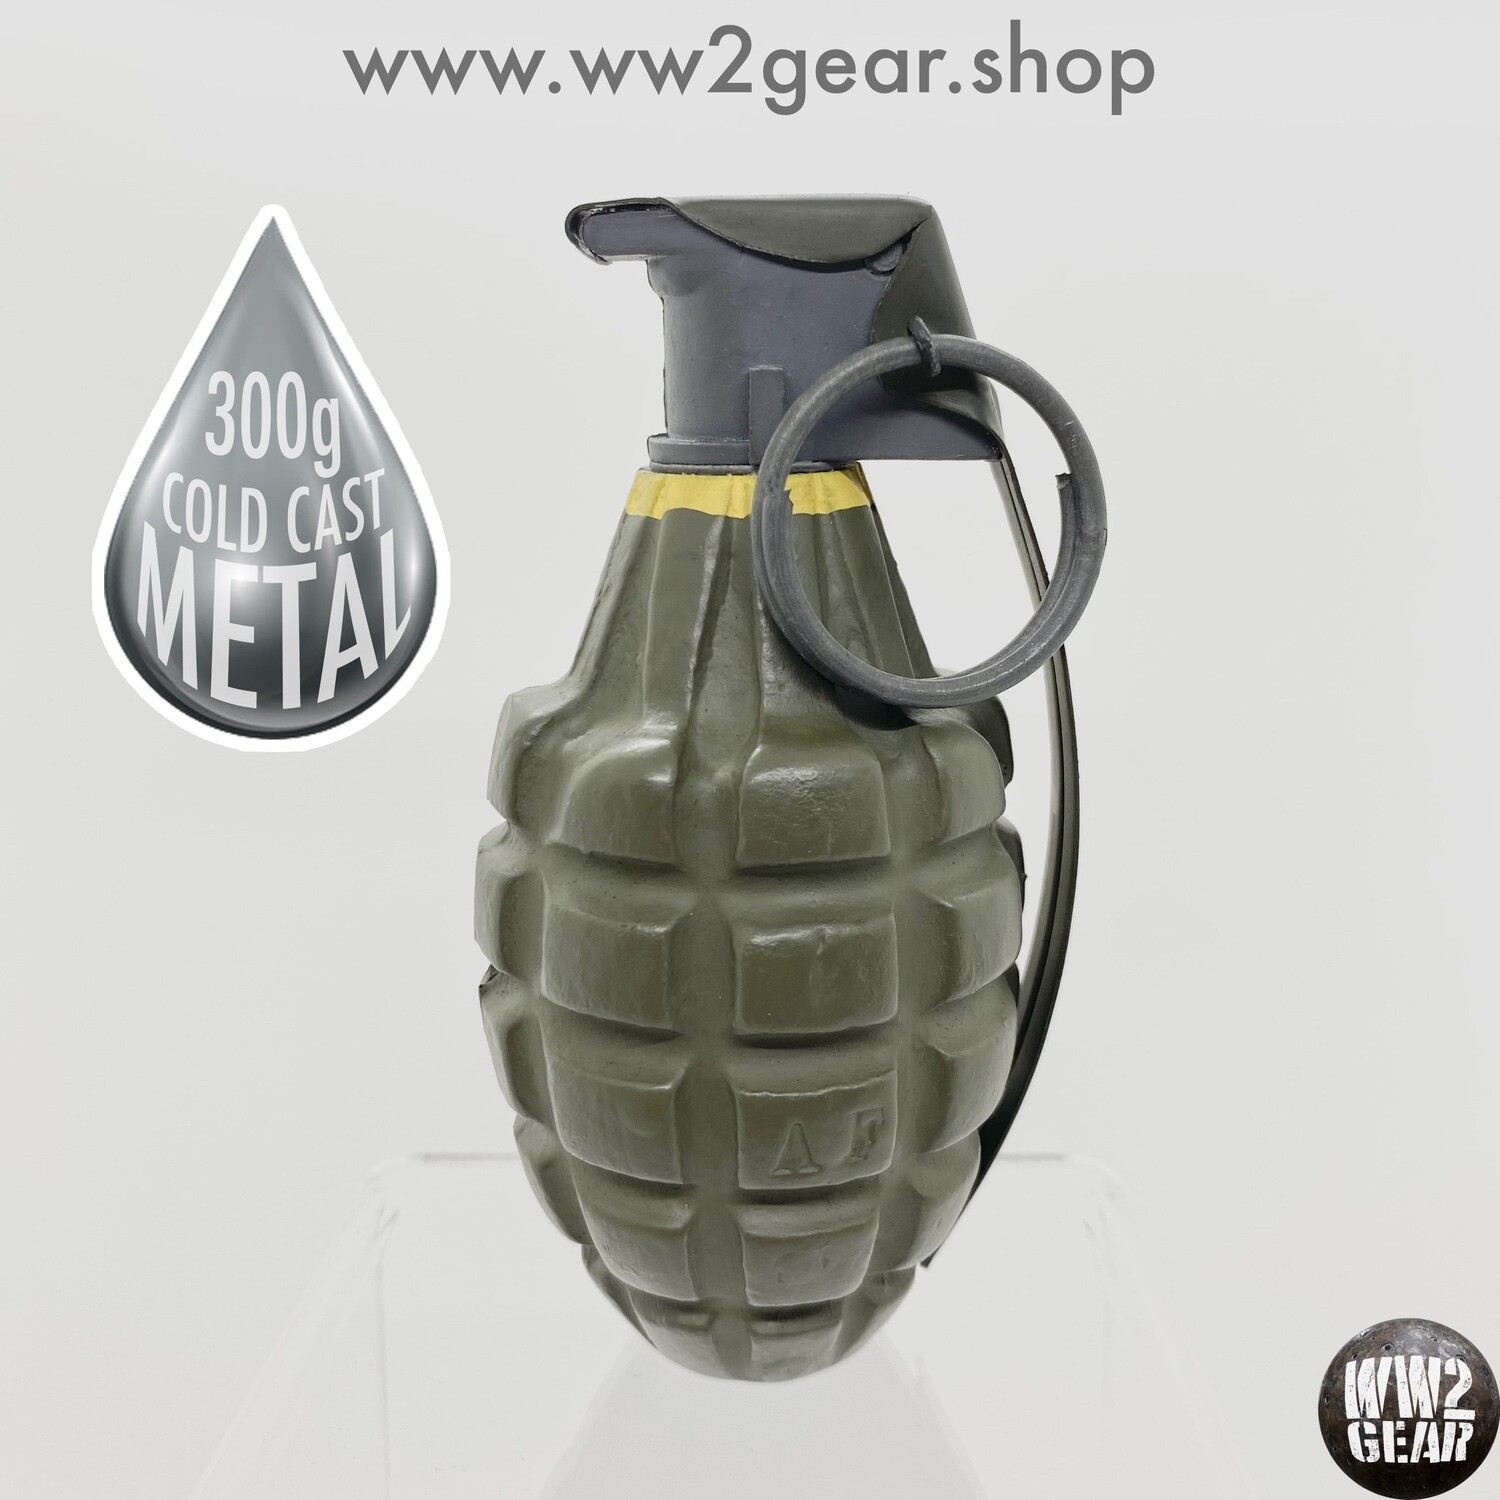 US WW2 MKII Pineapple Frag Grenade - OD Green (Cold Cast Metal Reproduction)